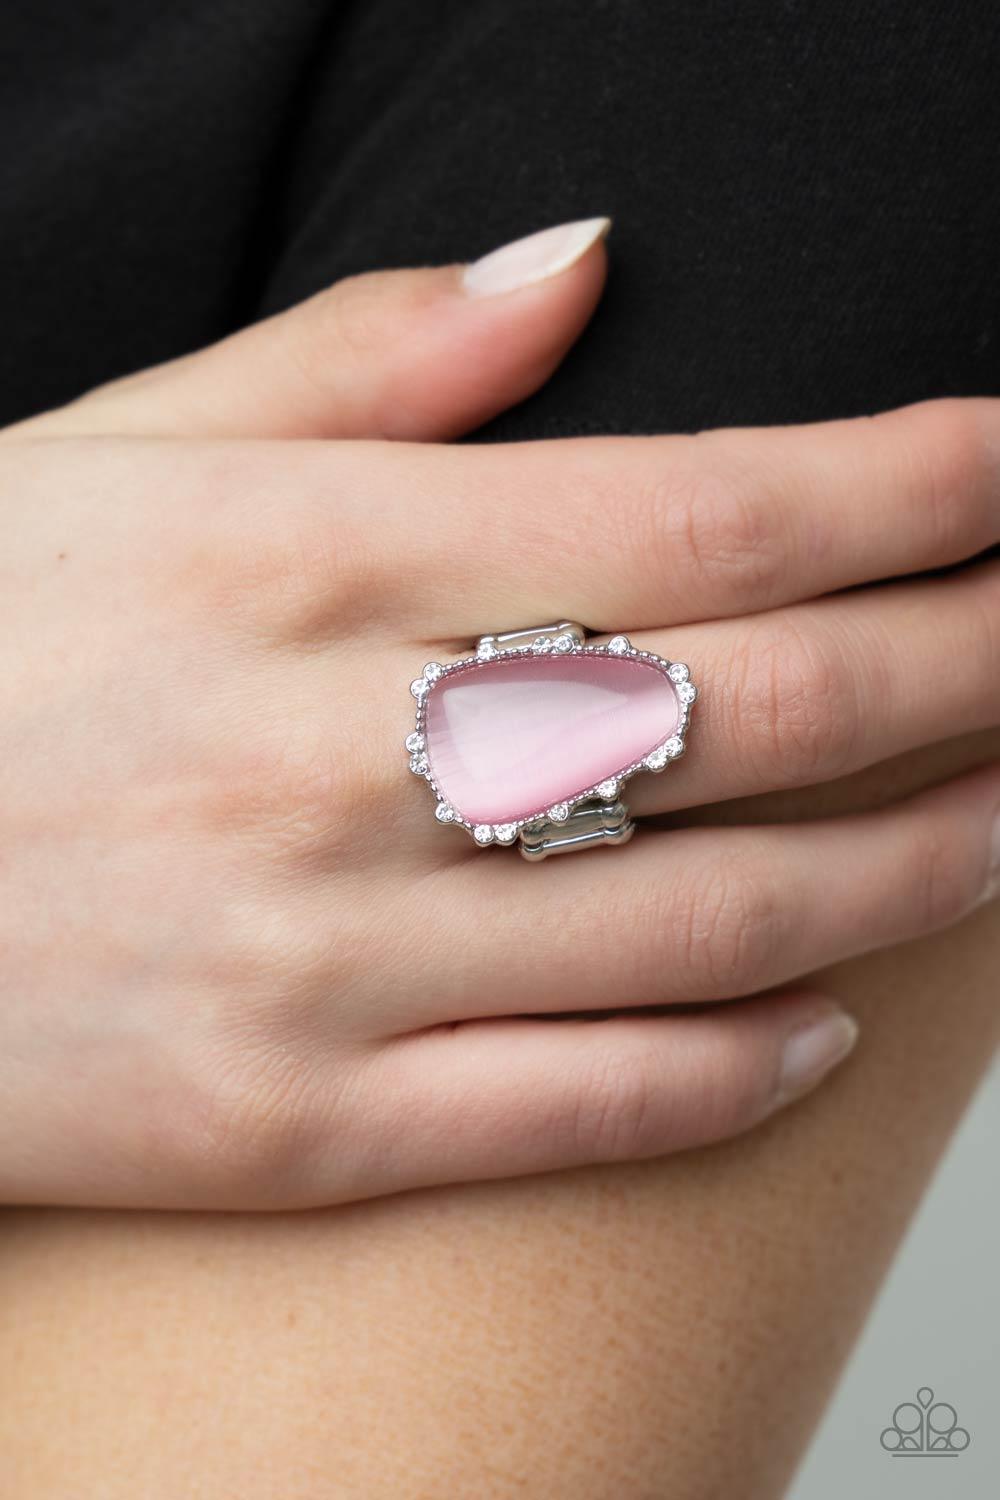 Paparazzi Accessories Newport Nouveau - Pink A tranquil asymmetrical pink cat's eye stone is encased in a delicately dotted shimmery silver frame. Dainty sparkly white rhinestones surround the oversized stone creating an elegant centerpiece atop the finge